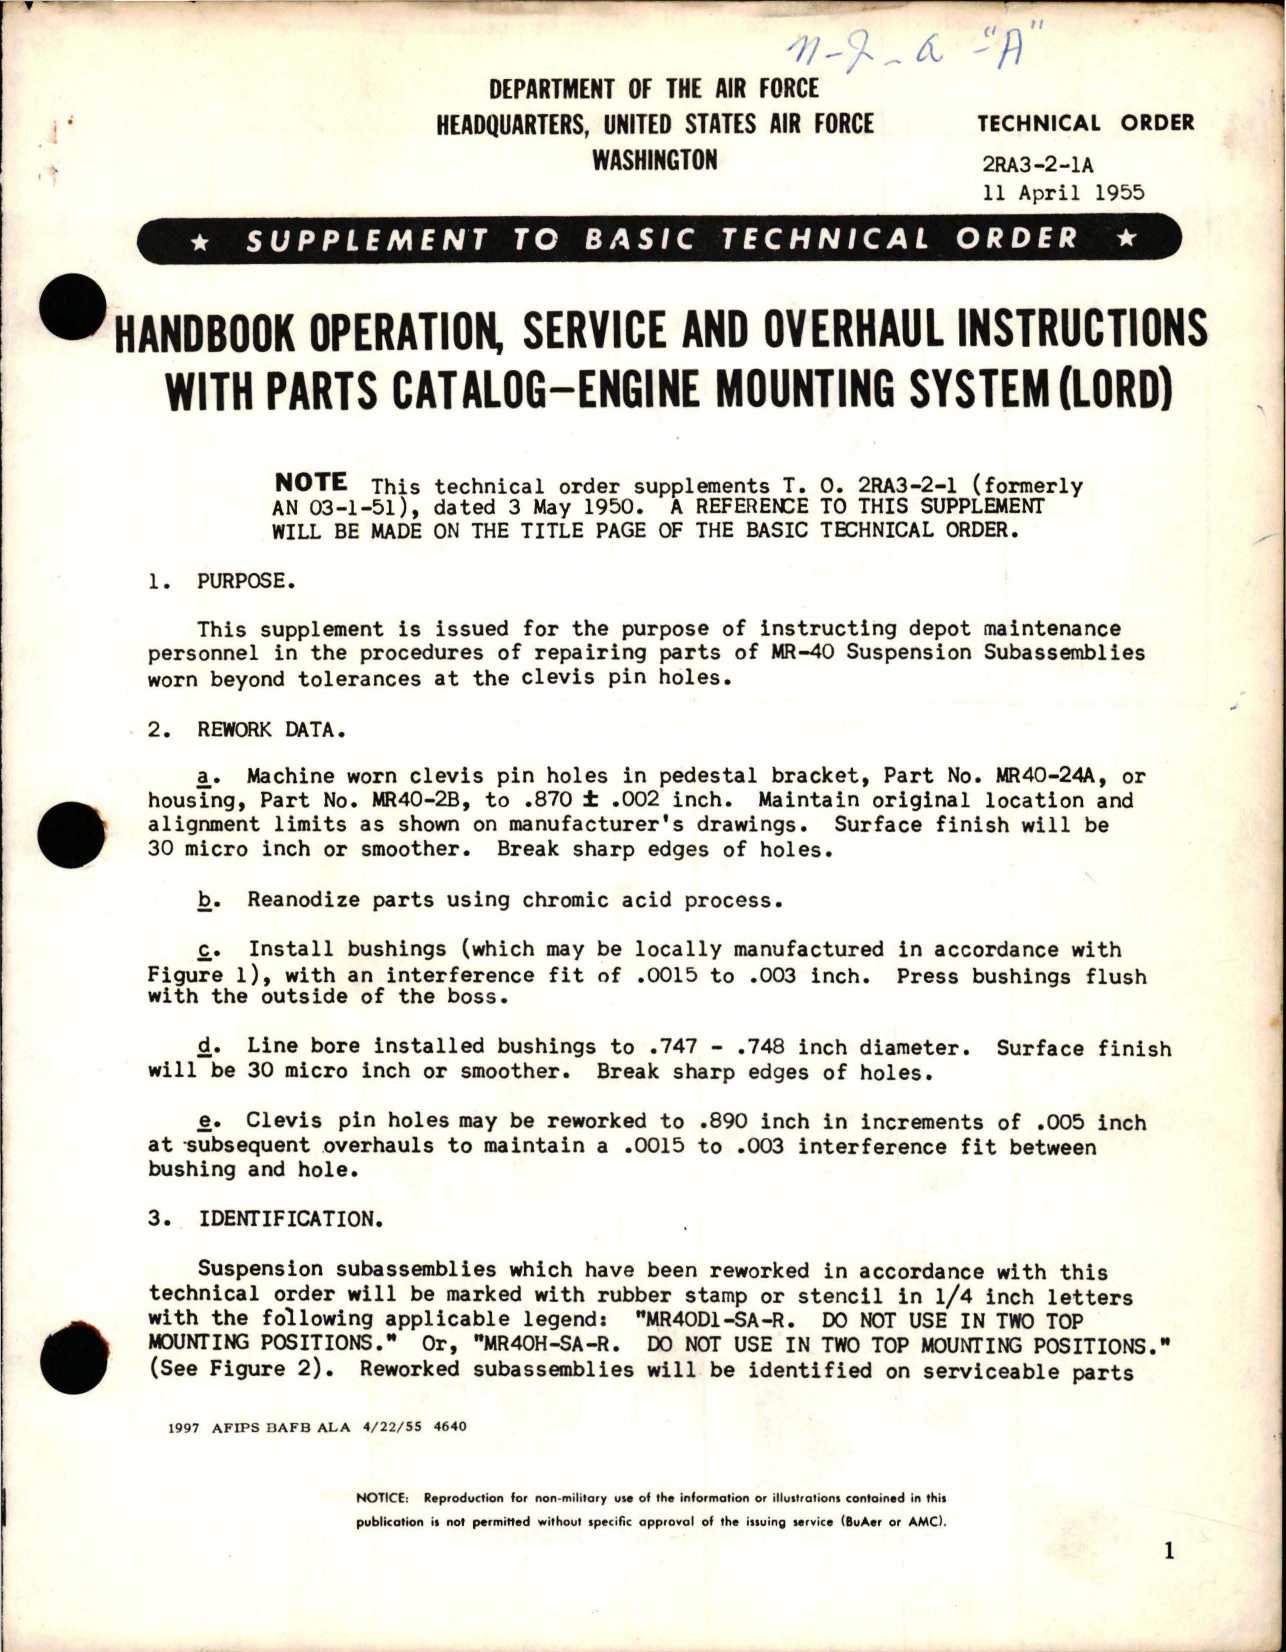 Sample page 1 from AirCorps Library document: Supplement to Operation, Service and Overhaul Instructions with Parts Catalog for Engine Mounting System